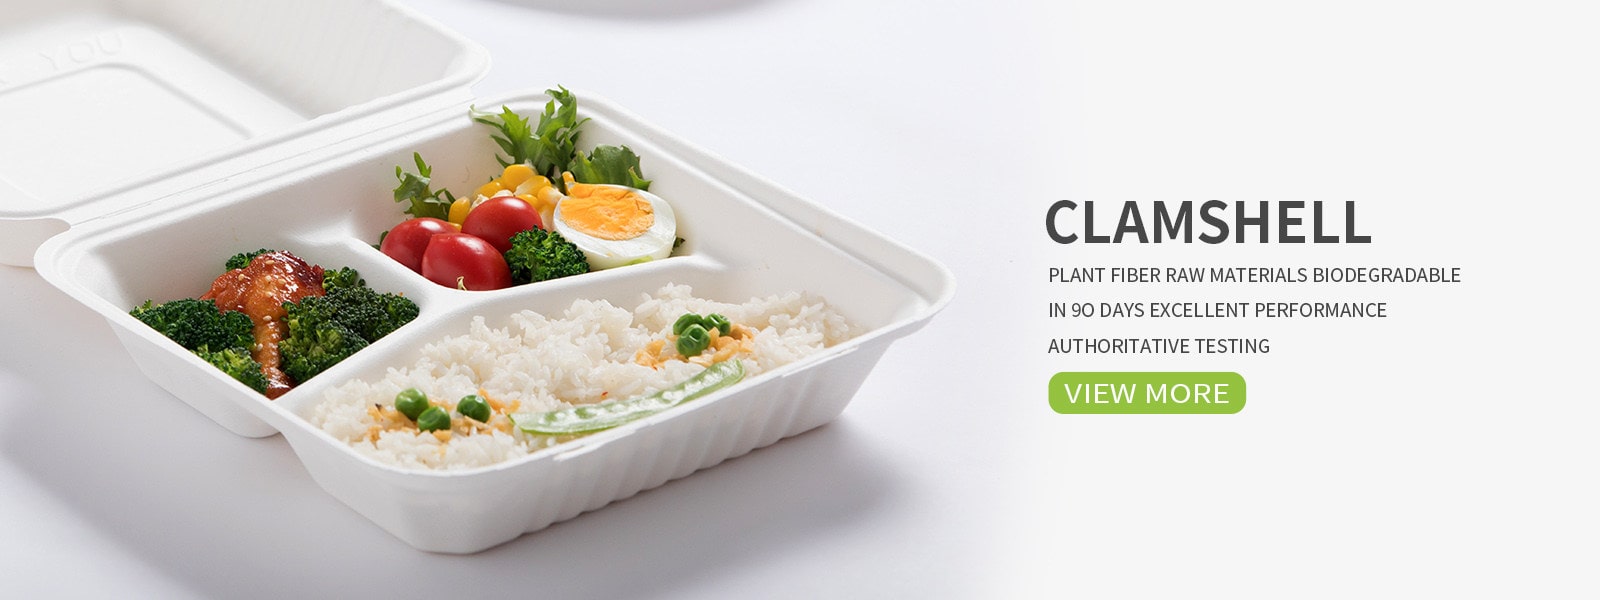 biodegradable food_containers_manufacturer.jpg